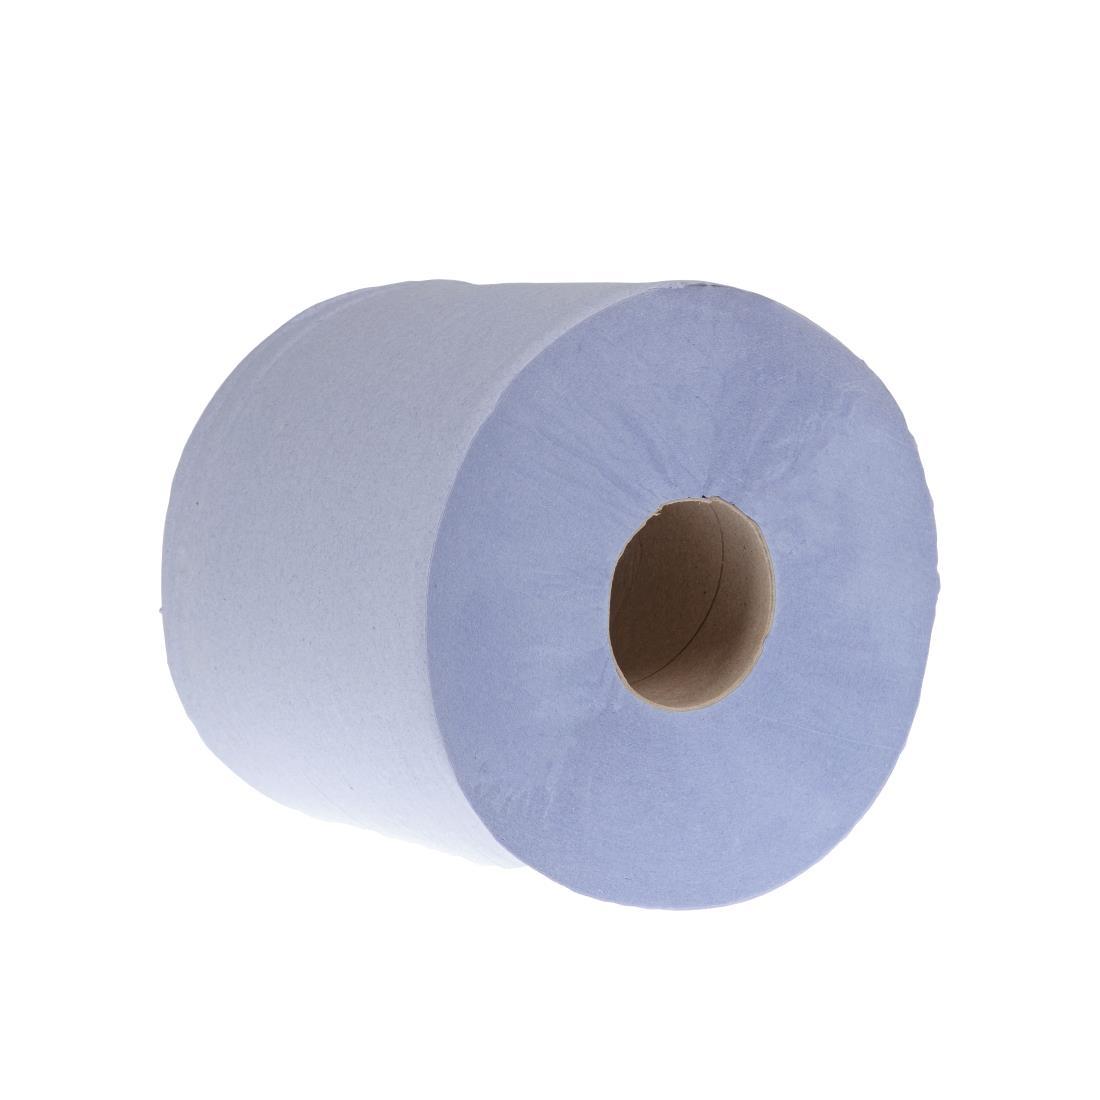 Jantex Blue Centrefeed Rolls 1ply 300m (Pack of 6) - GD833  - 2